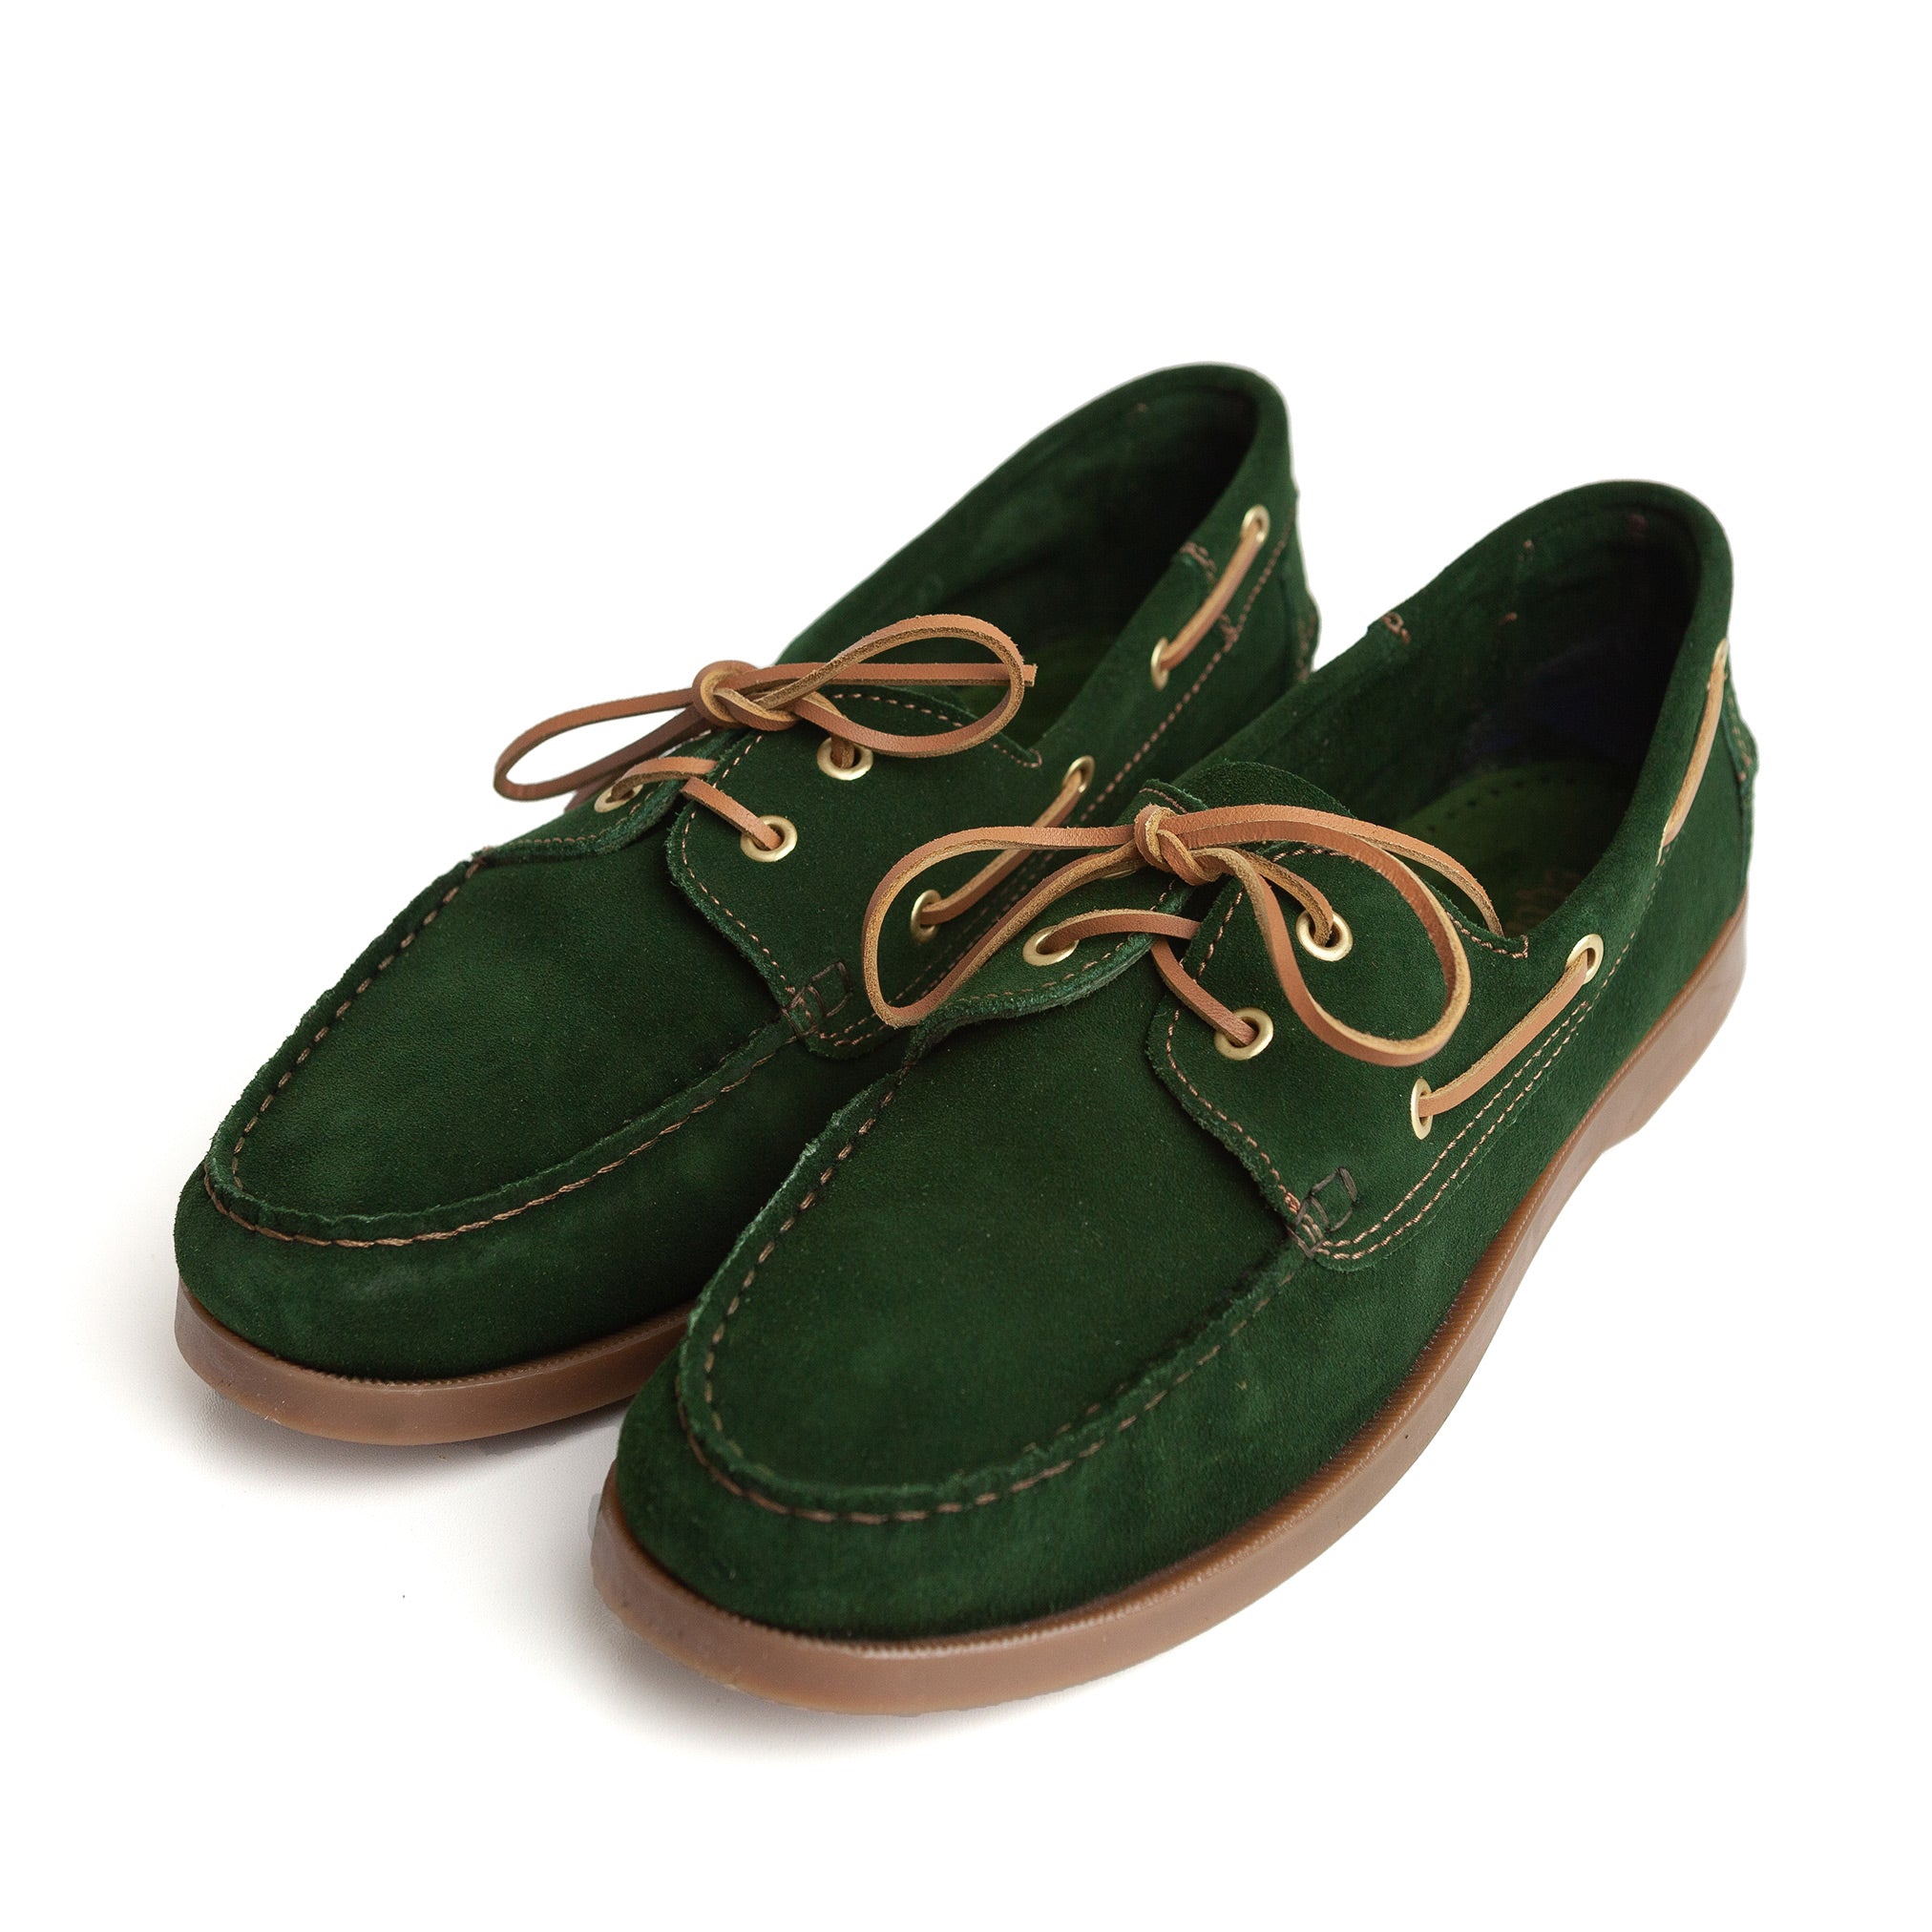 Deck Shoe in Forest Green